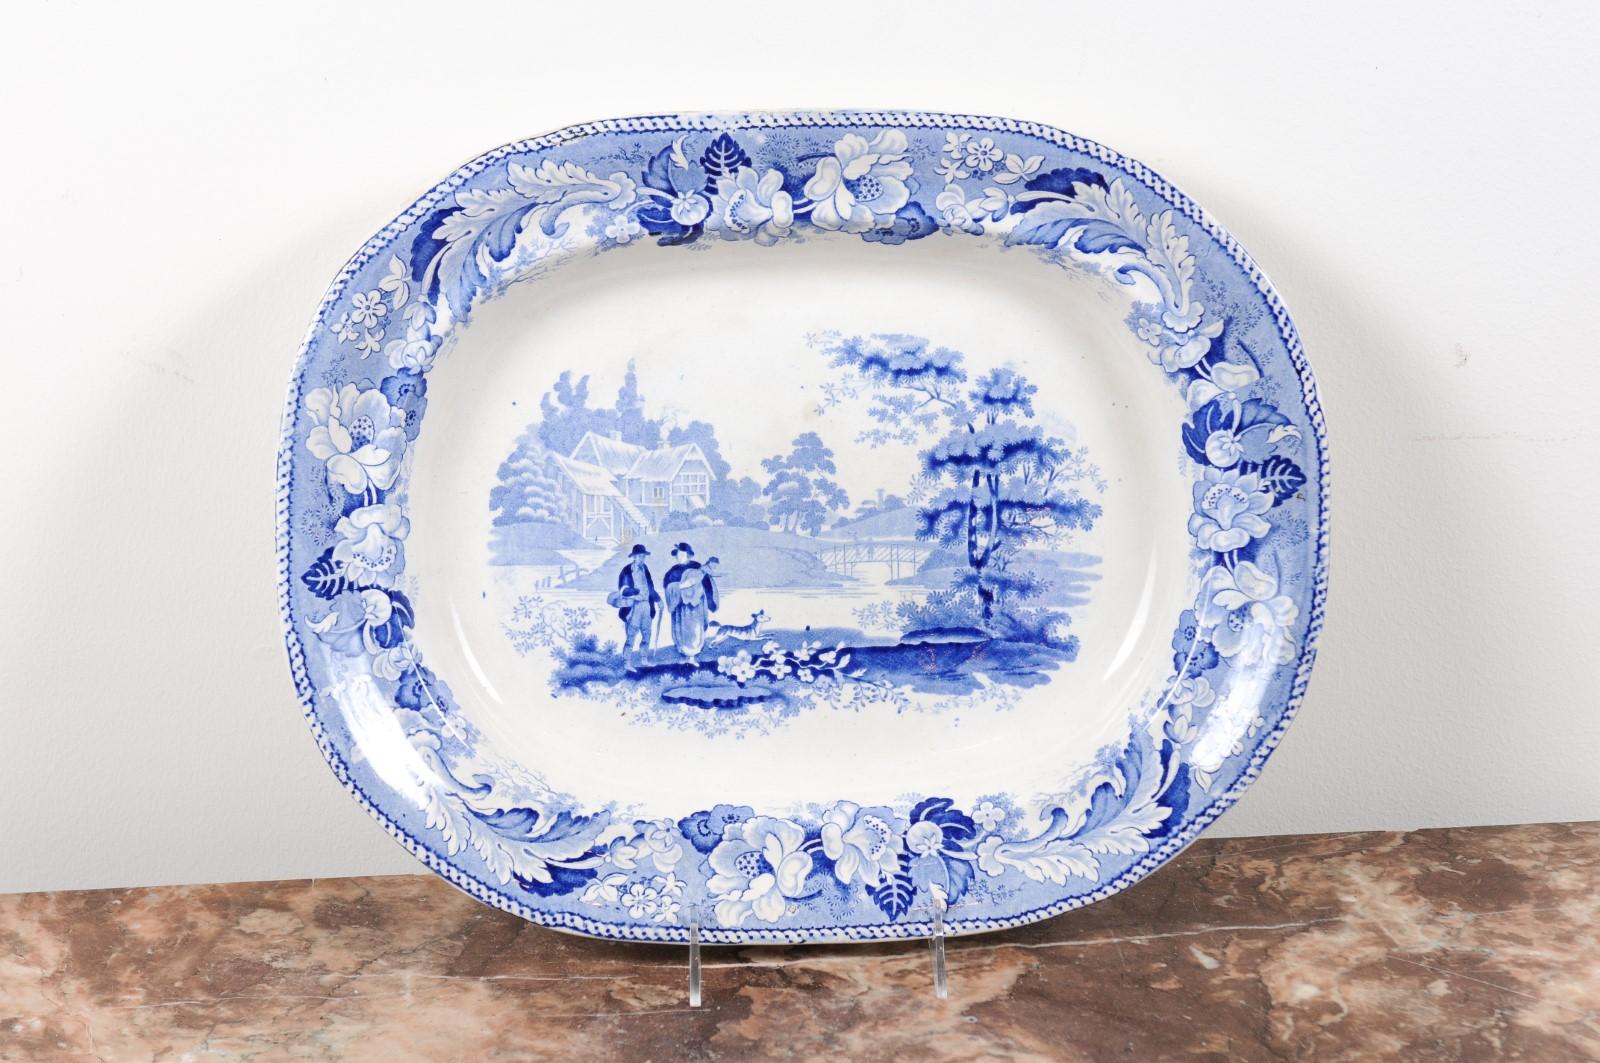 An English blue and white platter from the 19th century, with pastoral scene and floral border. Born in England during the 19th century, this blue and white platter features a peaceful pastoral scene. Two humble characters, accompanied by their dog,